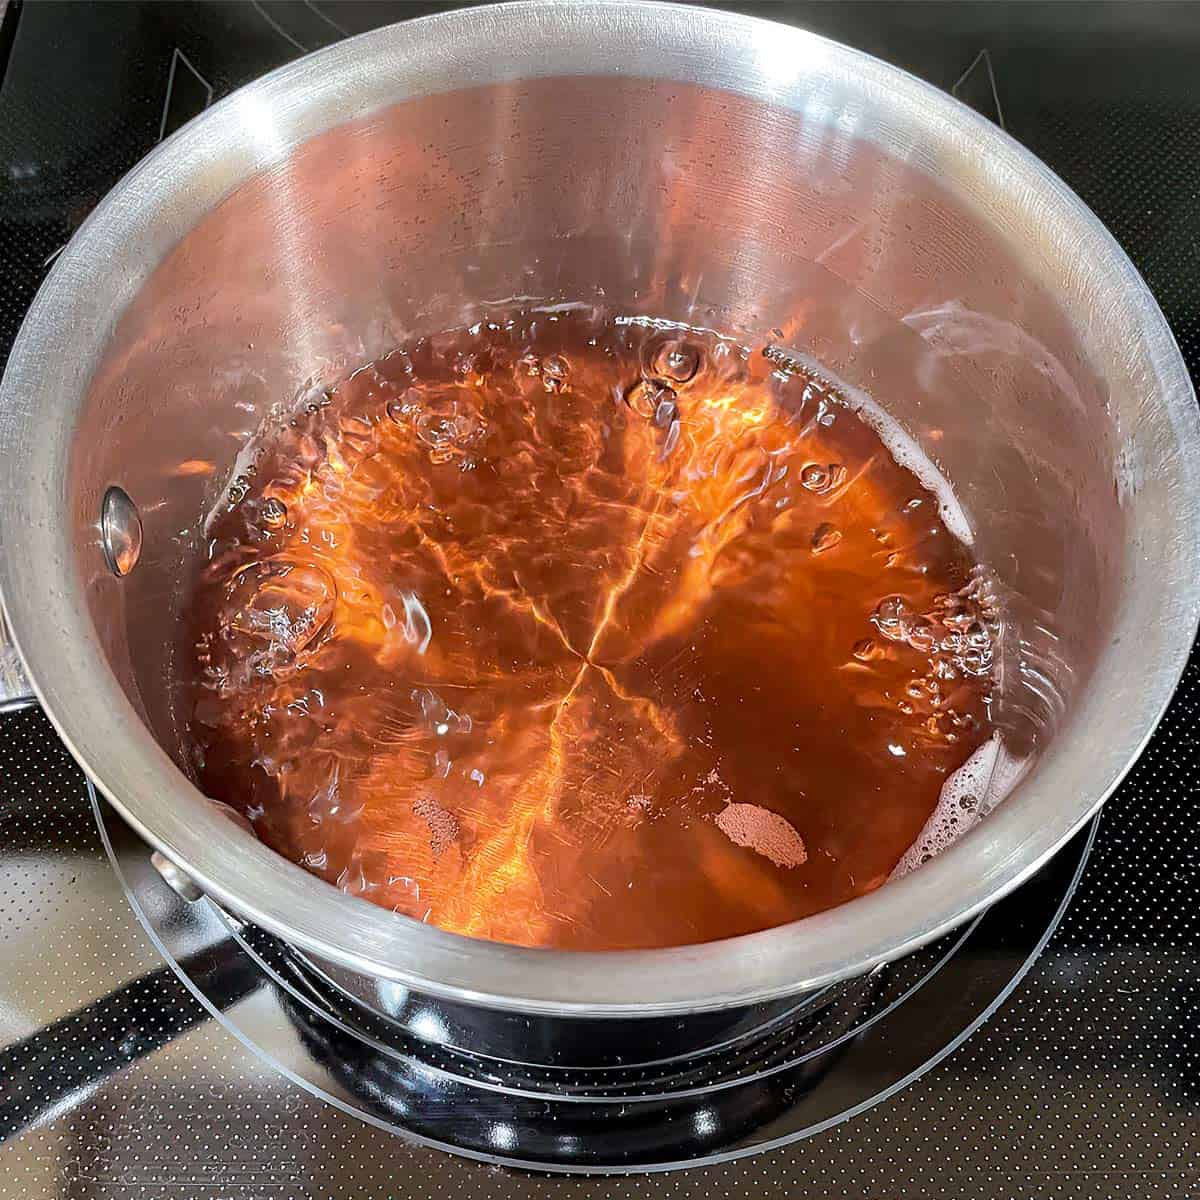 Rose champagne just starting to boil in a saucepan.